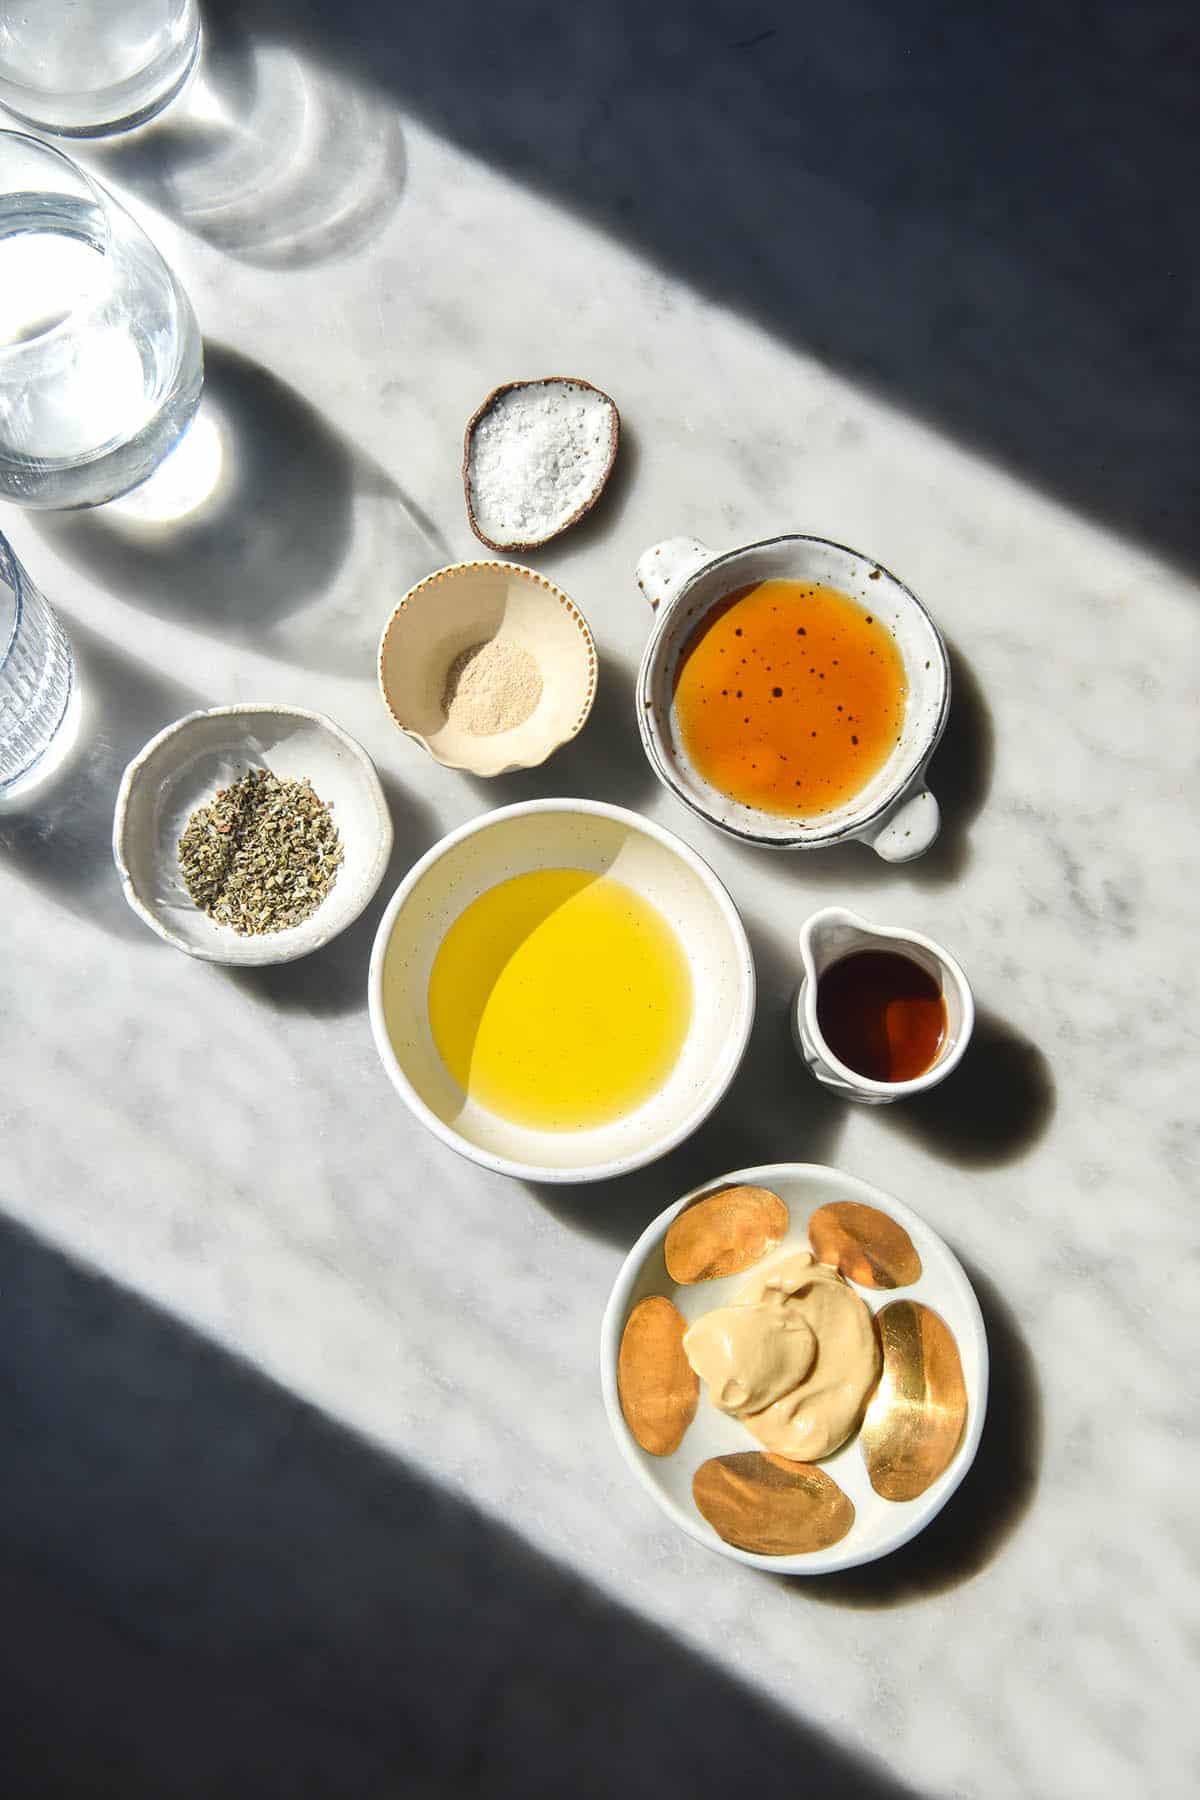 An aerial image of the ingredients used for a low FODMAP salad dressing arranged in small white bowls in a sunlit marble table. Water glasses cast a light and shadow pattern across the image, which is framed by contrasting light